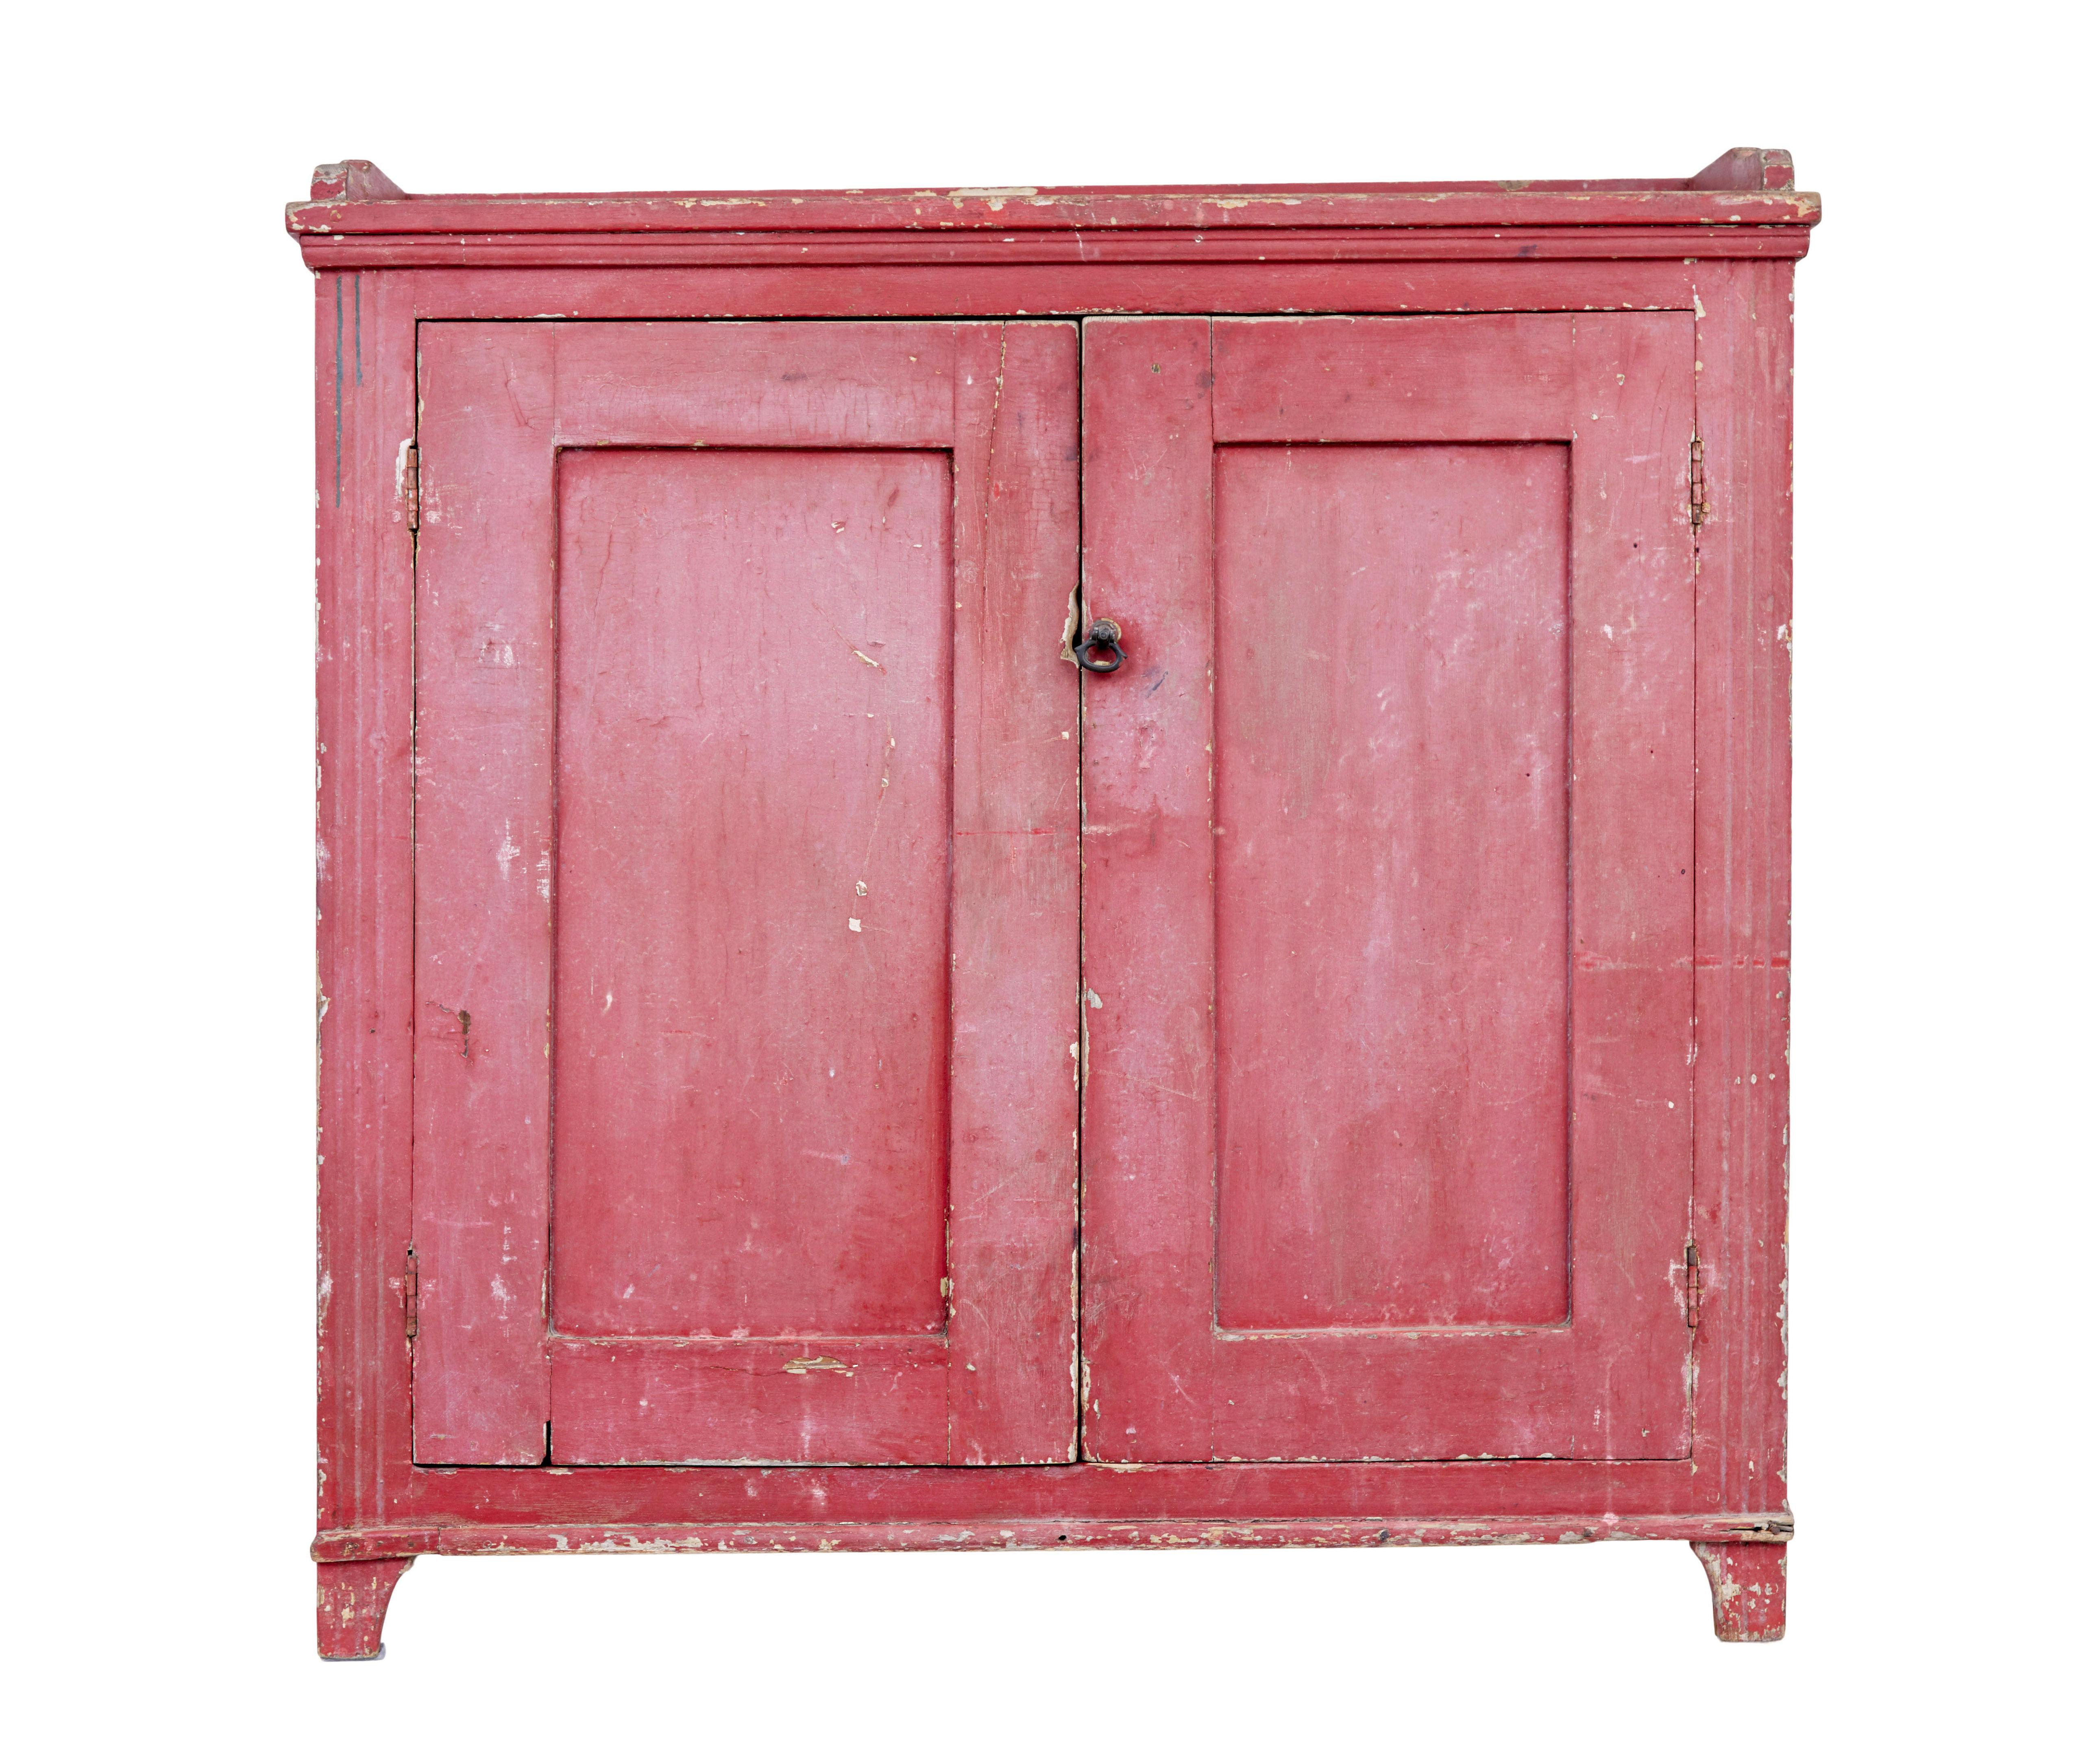 Swedish mid 19th century original paint cupboard circa 1850.

Striking kitchen cupboard offered in original condition.  Made in thick solid pine.  Original paint has taken on a lovely faded colour, if the piece was waxed/polished it returns to a